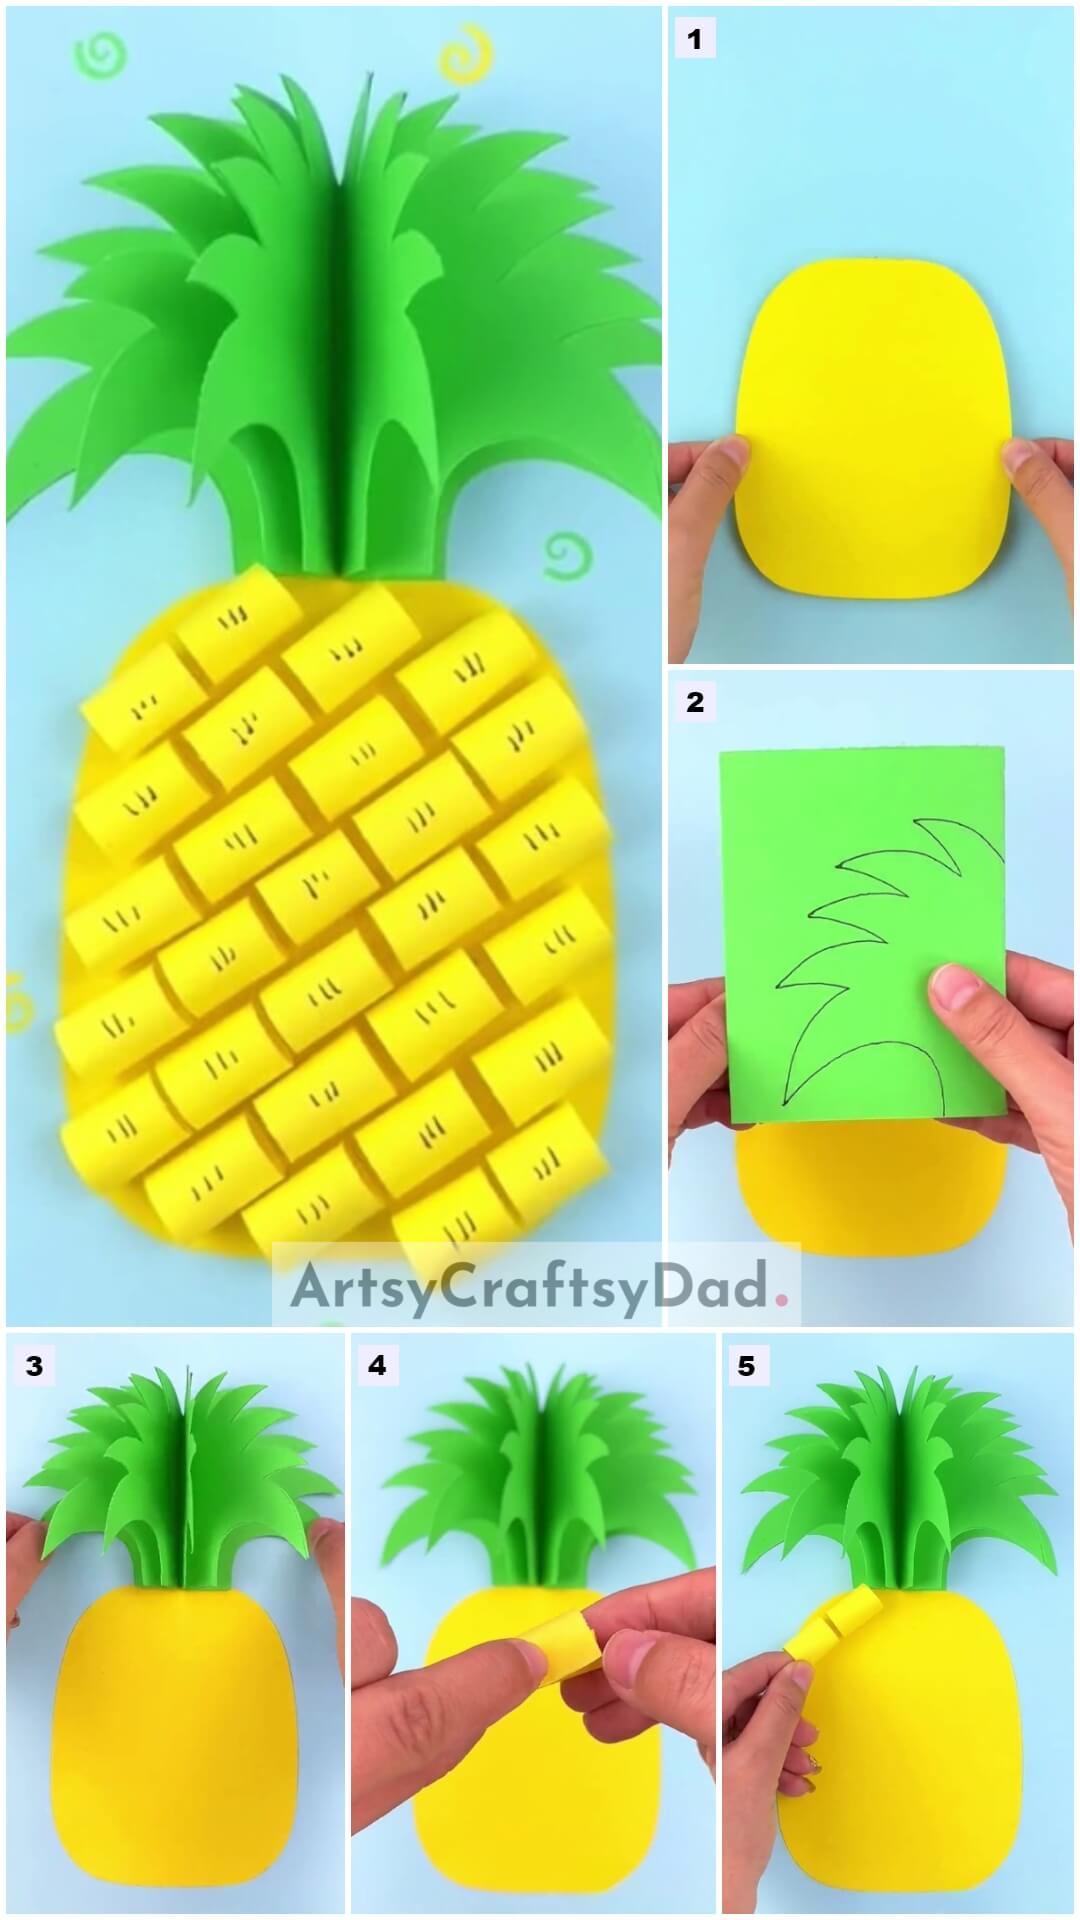 Easy To Make 3D Paper Pineapple Craft Tutorial